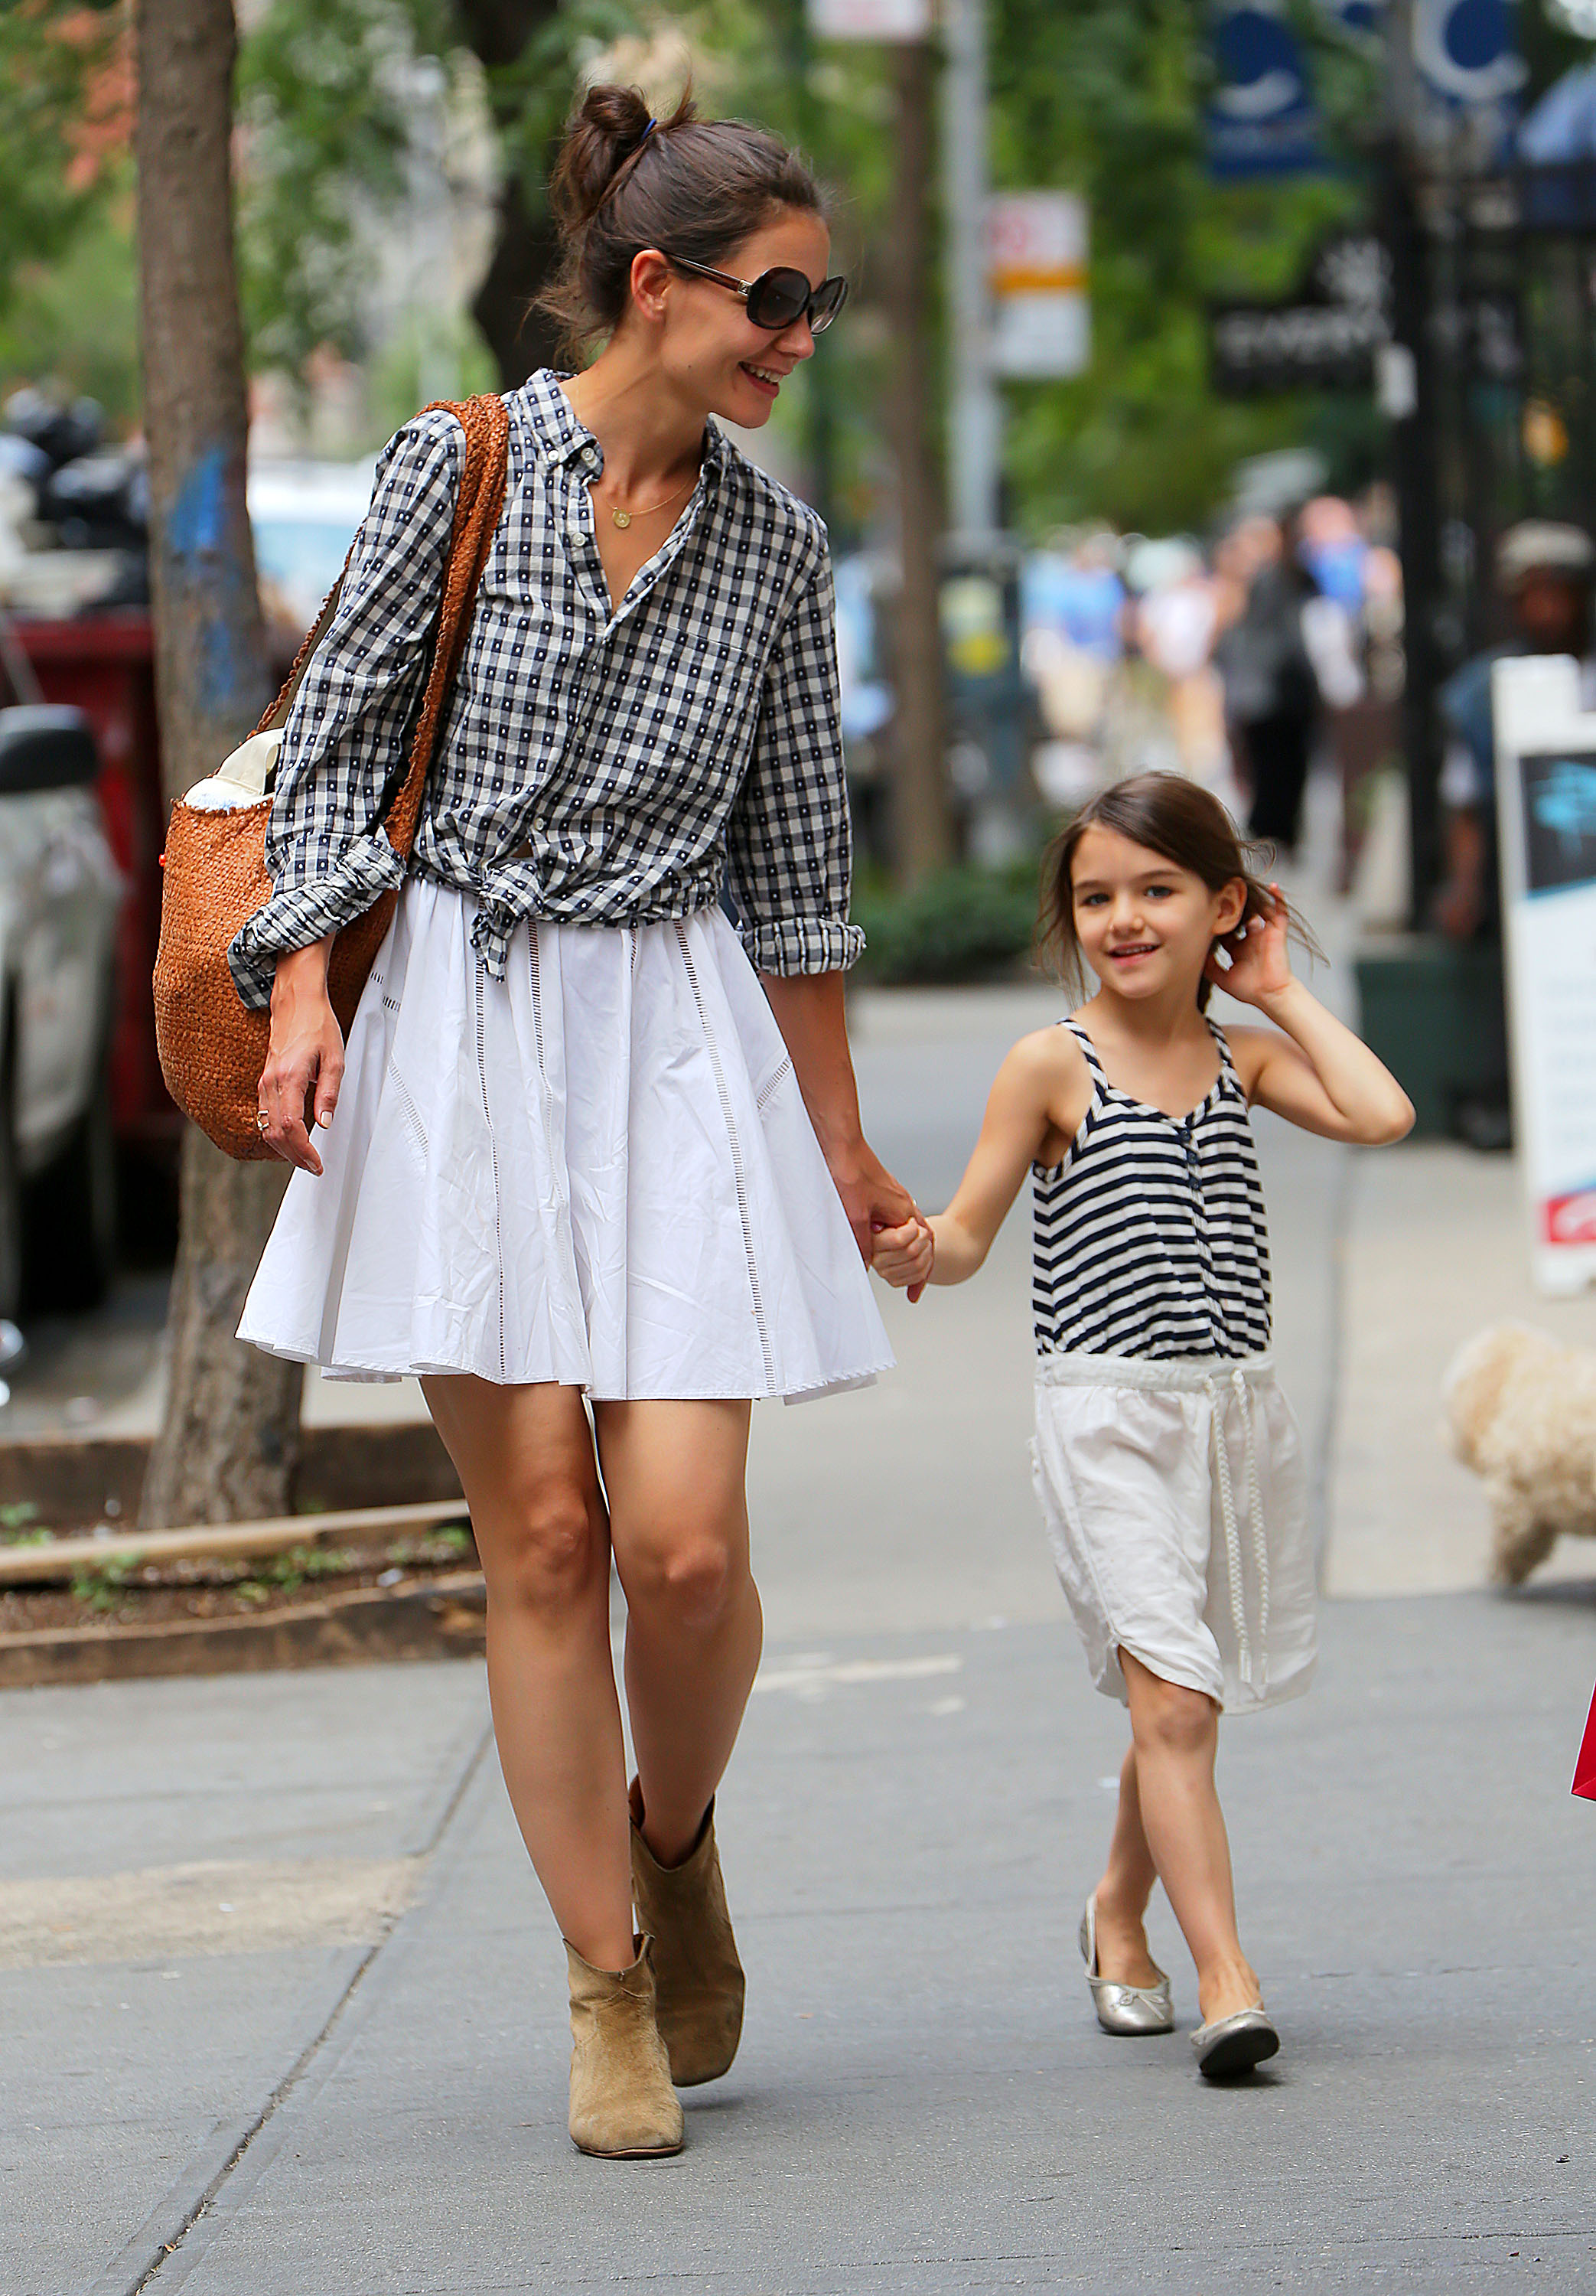 Noelle is the middle name of Suri's mother, Katie Holmes, who she remains extremely close with